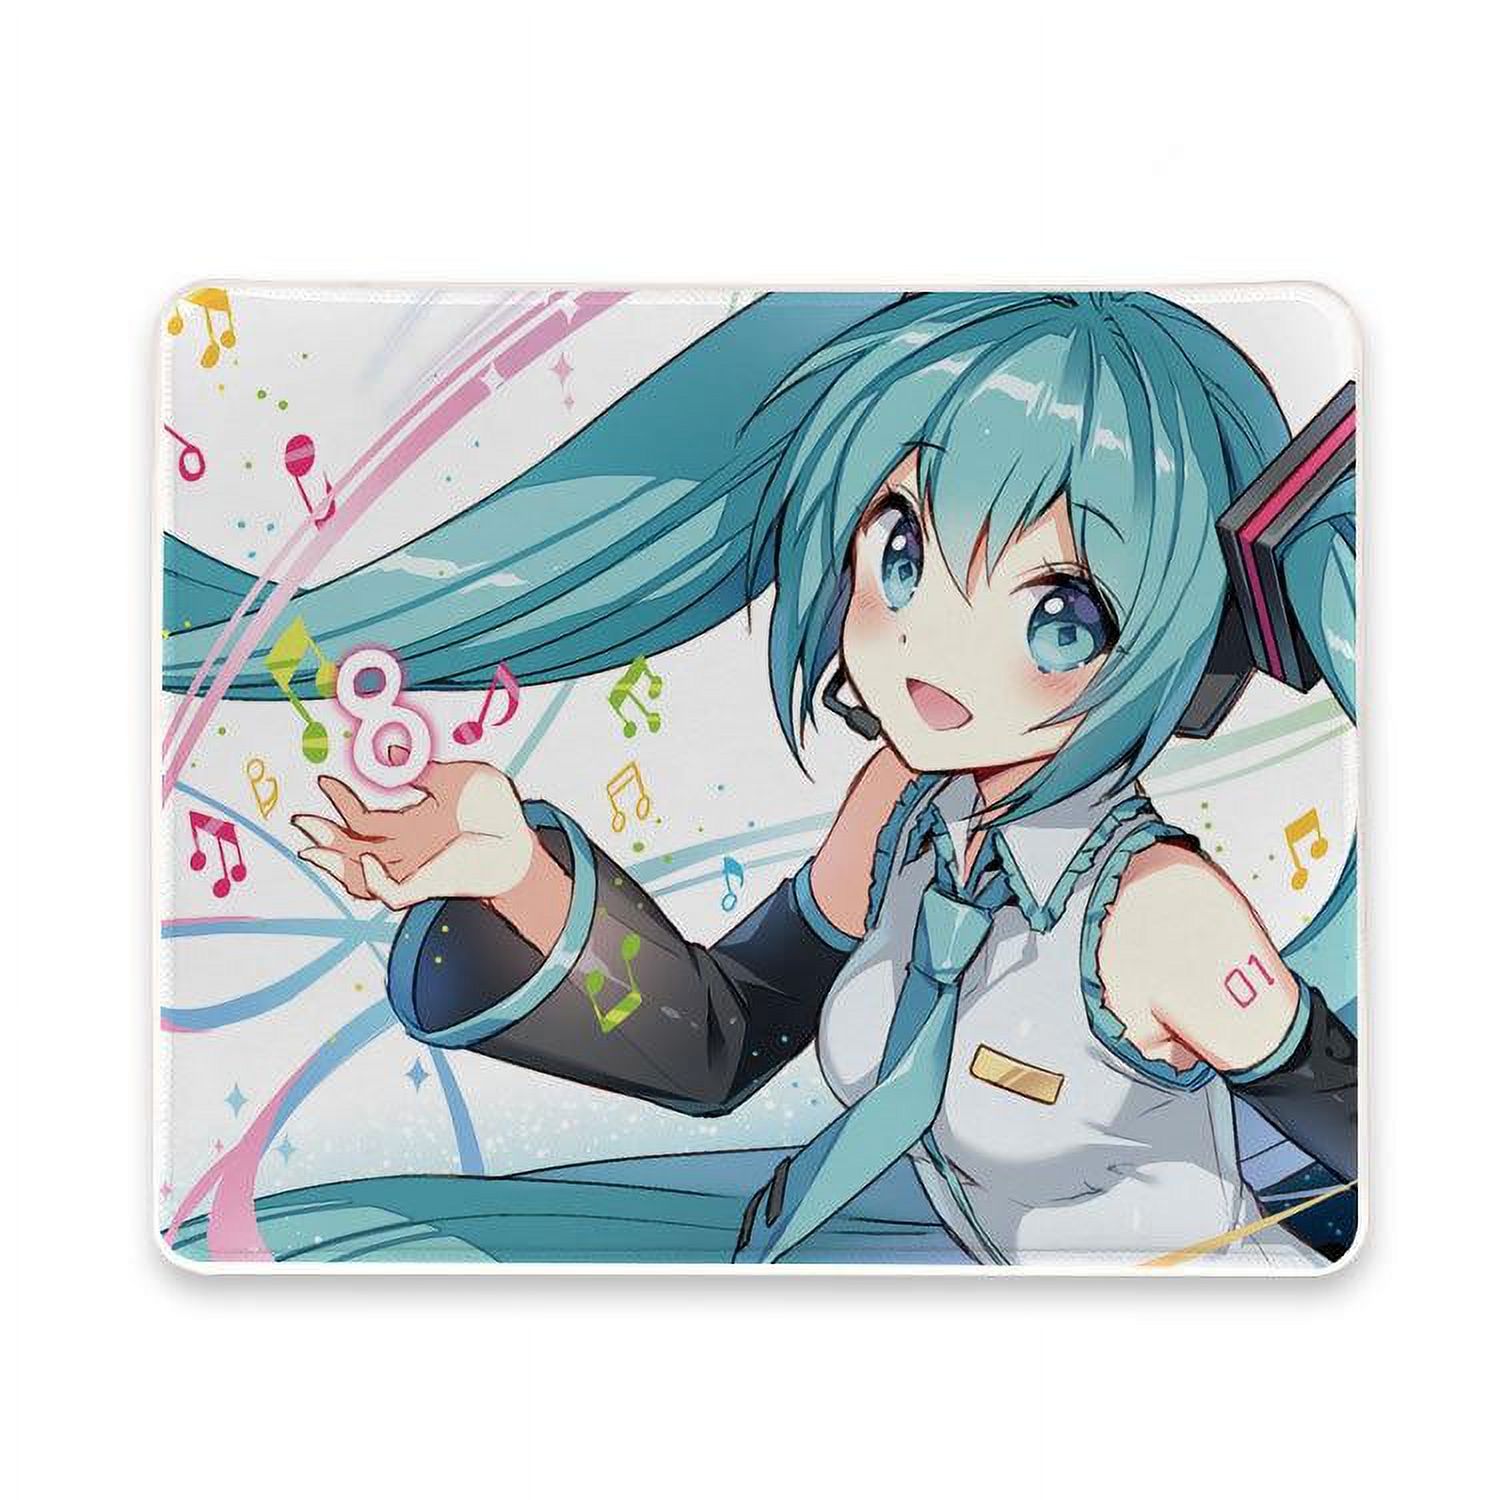 Non-Slip Mouse Pad for Home, Office, and Gaming Desk mousepad anti-slip mouse pad mat mice mousepad desktop mouse pad laptop mouse pad gaming mouse pad - image 3 of 7